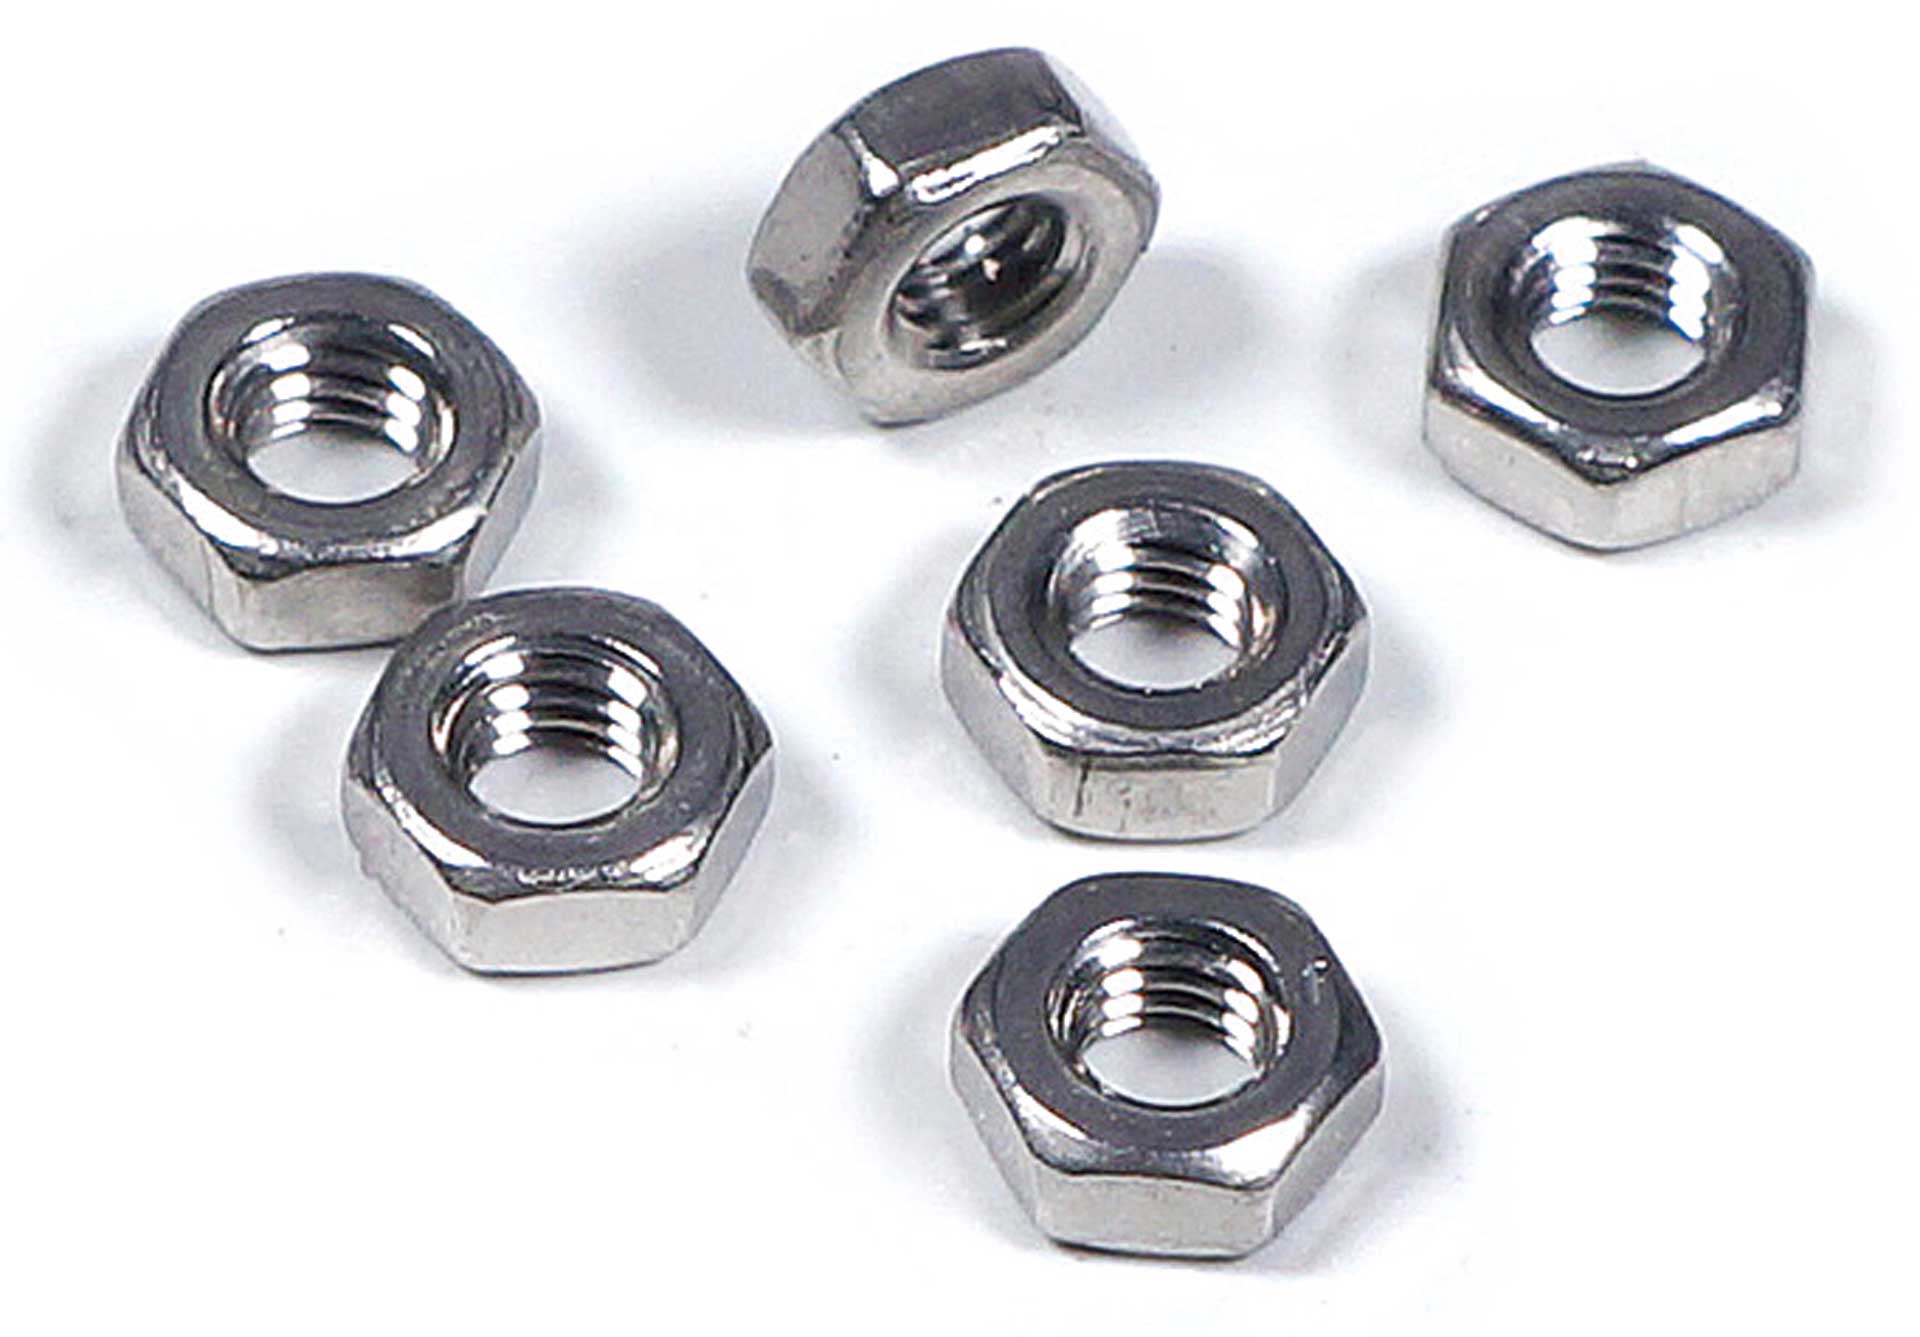 Robbe Modellsport Nuts M2.5 30pcs. stainless steel